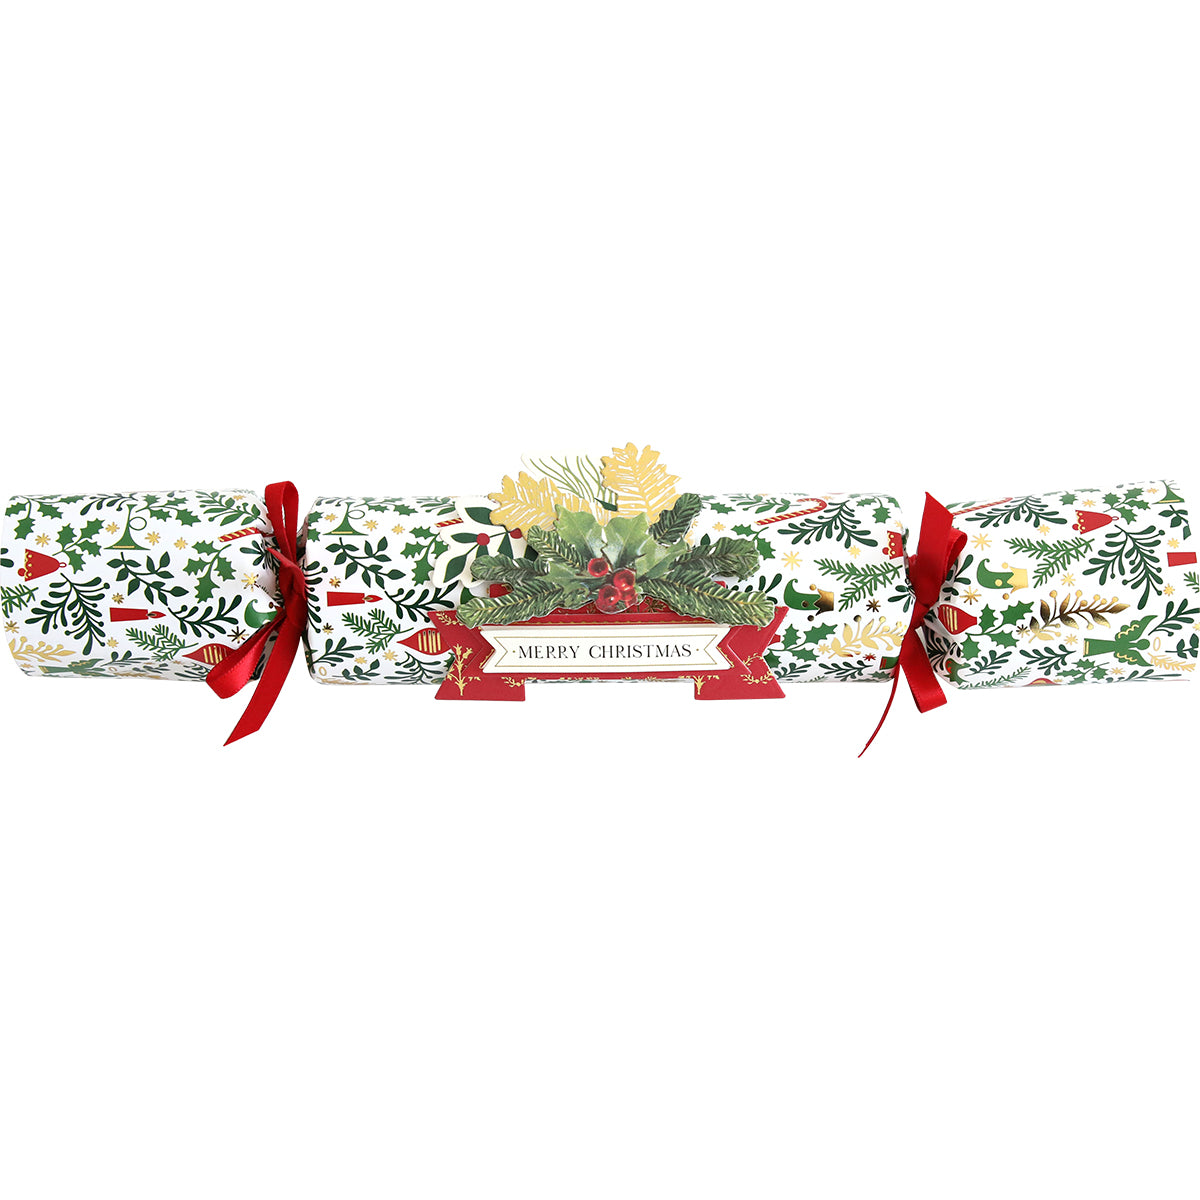 Fun favors - a set of Christmas Crackers Dies with festive red and green ribbons.